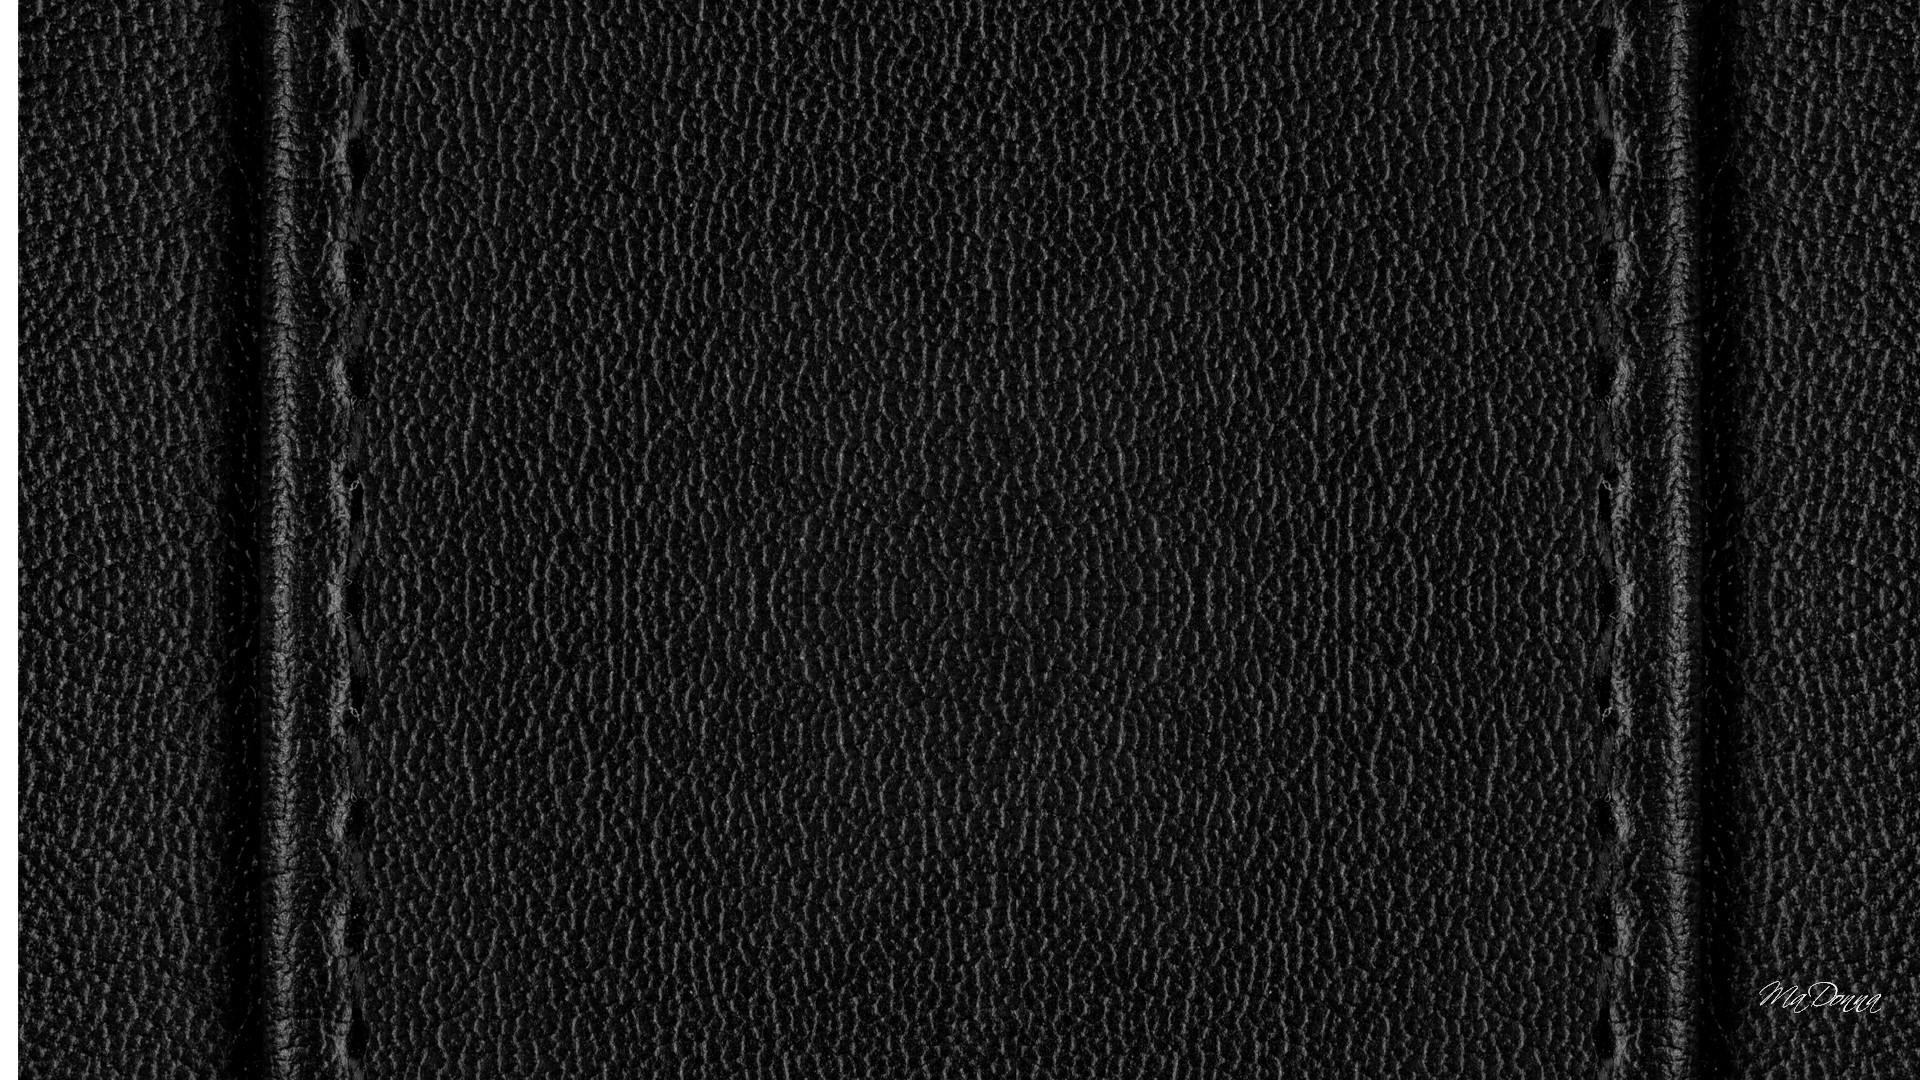 Black Stitched Leather Wallpaper Colorful Better